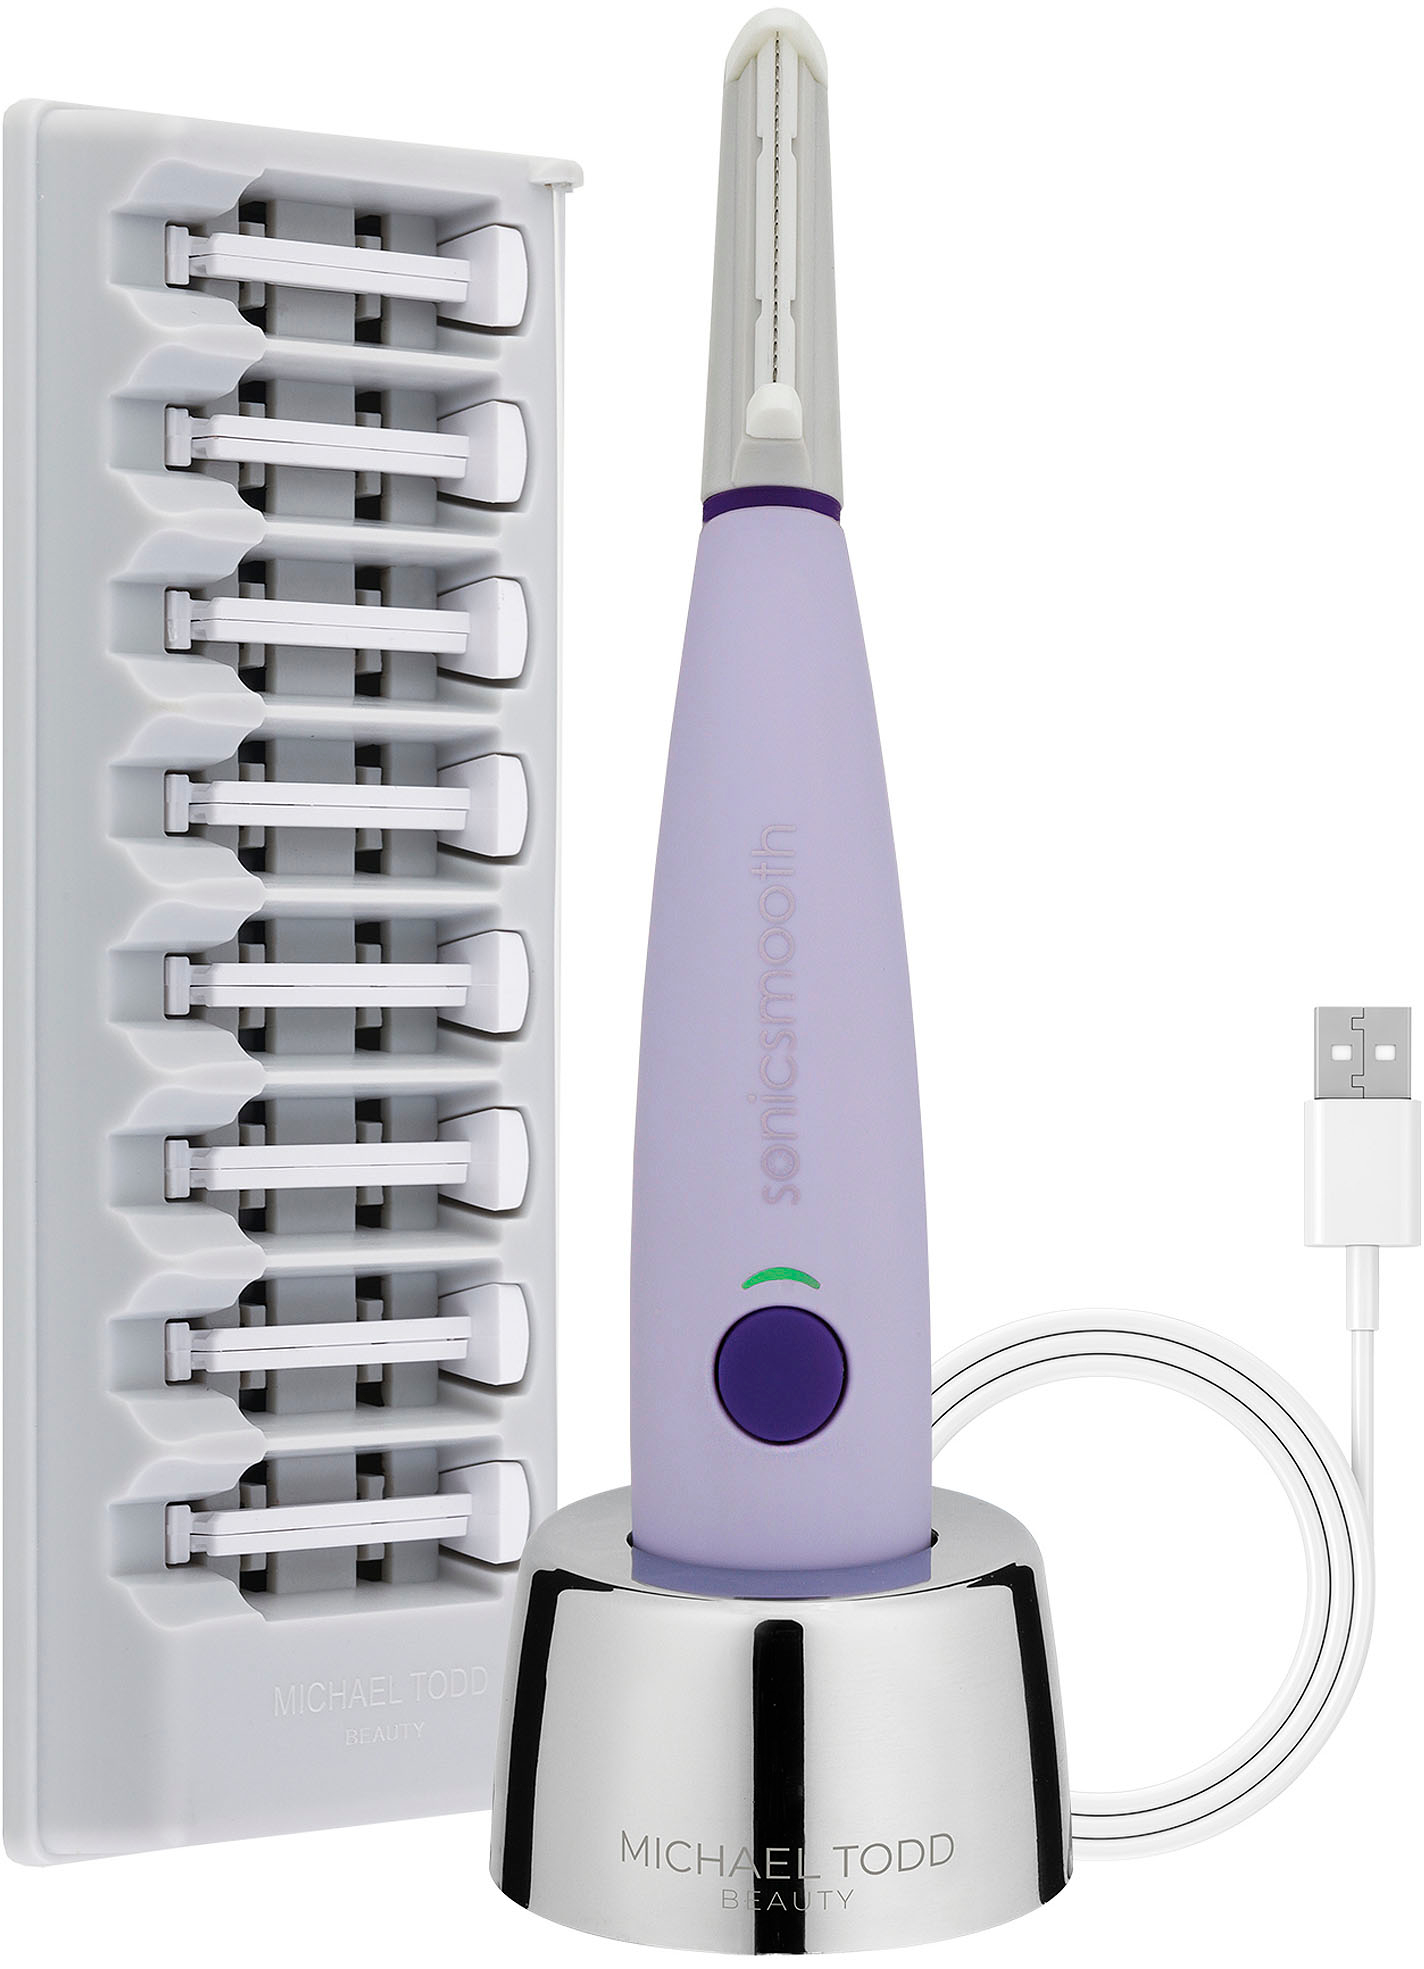 Angle View: Michael Todd Beauty Sonicsmooth 2-in-1 Sonic Dermaplaning System Lavender 5 Piece Set